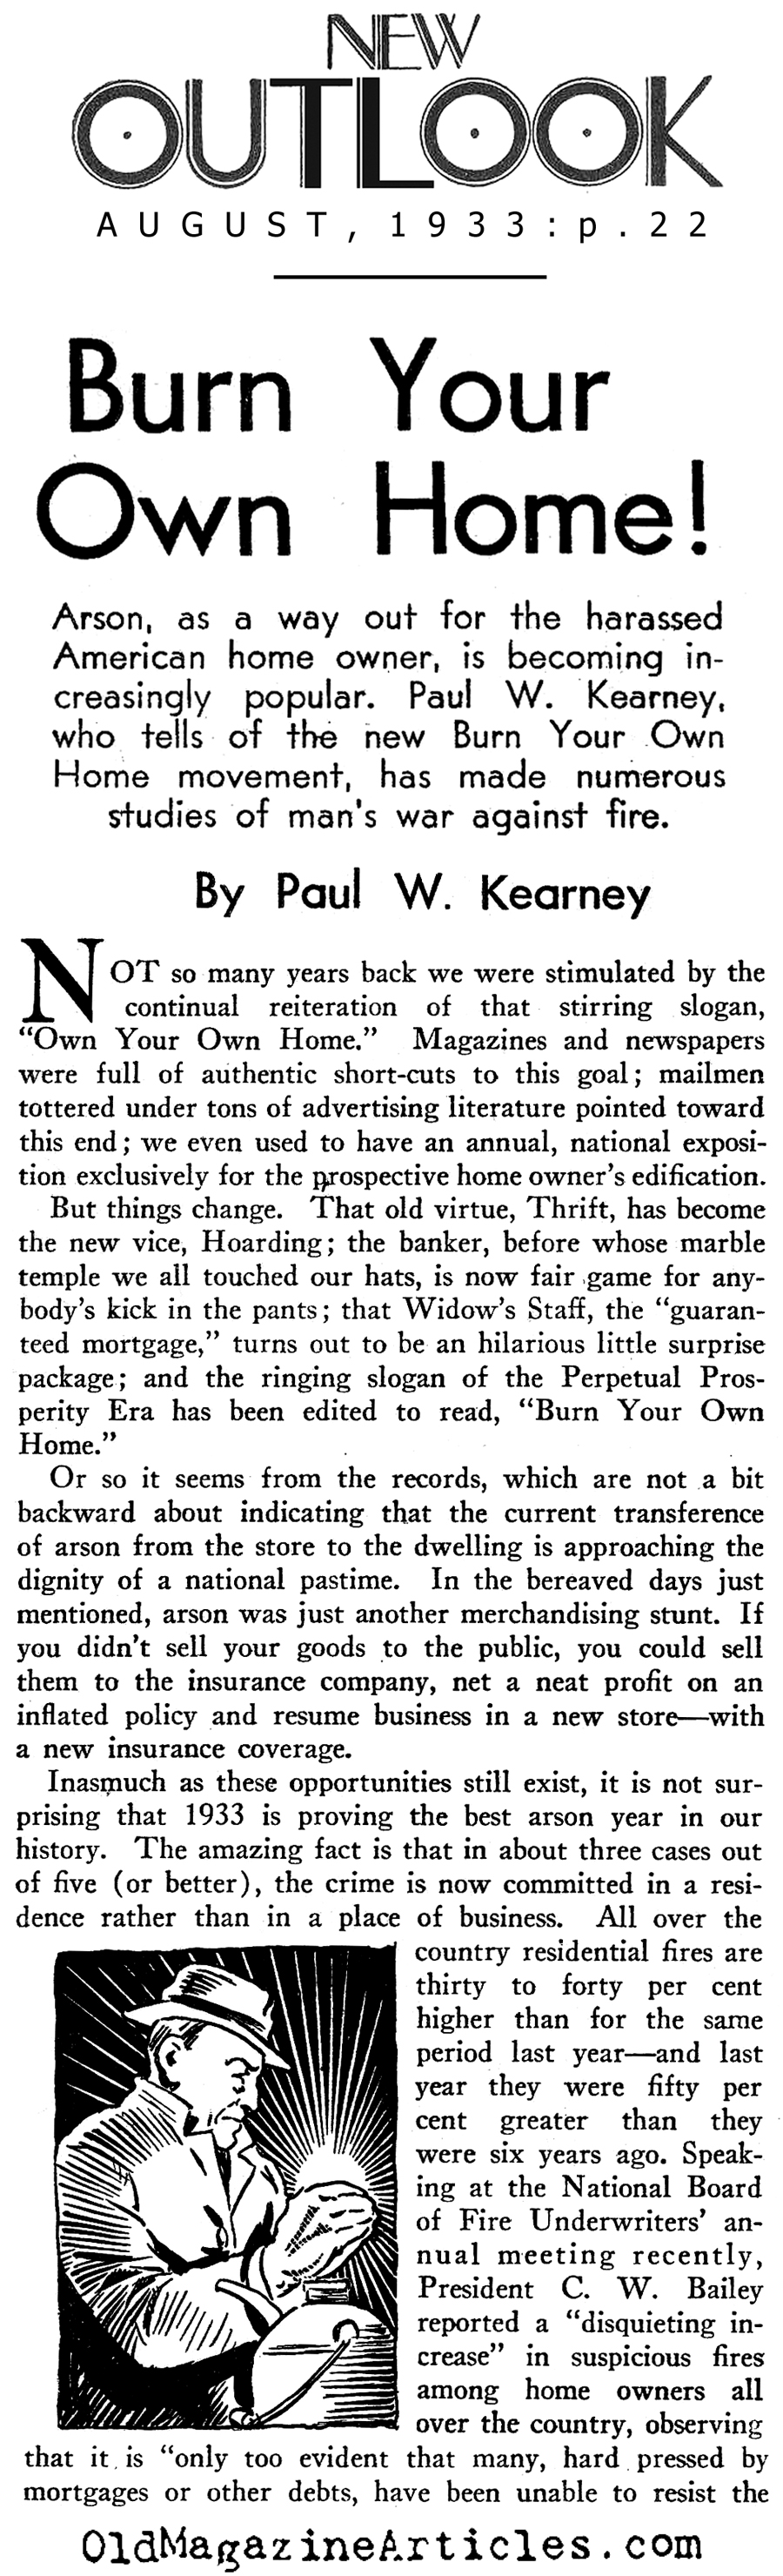 Arson on the Rise (New Outlook Magazine, 1933)